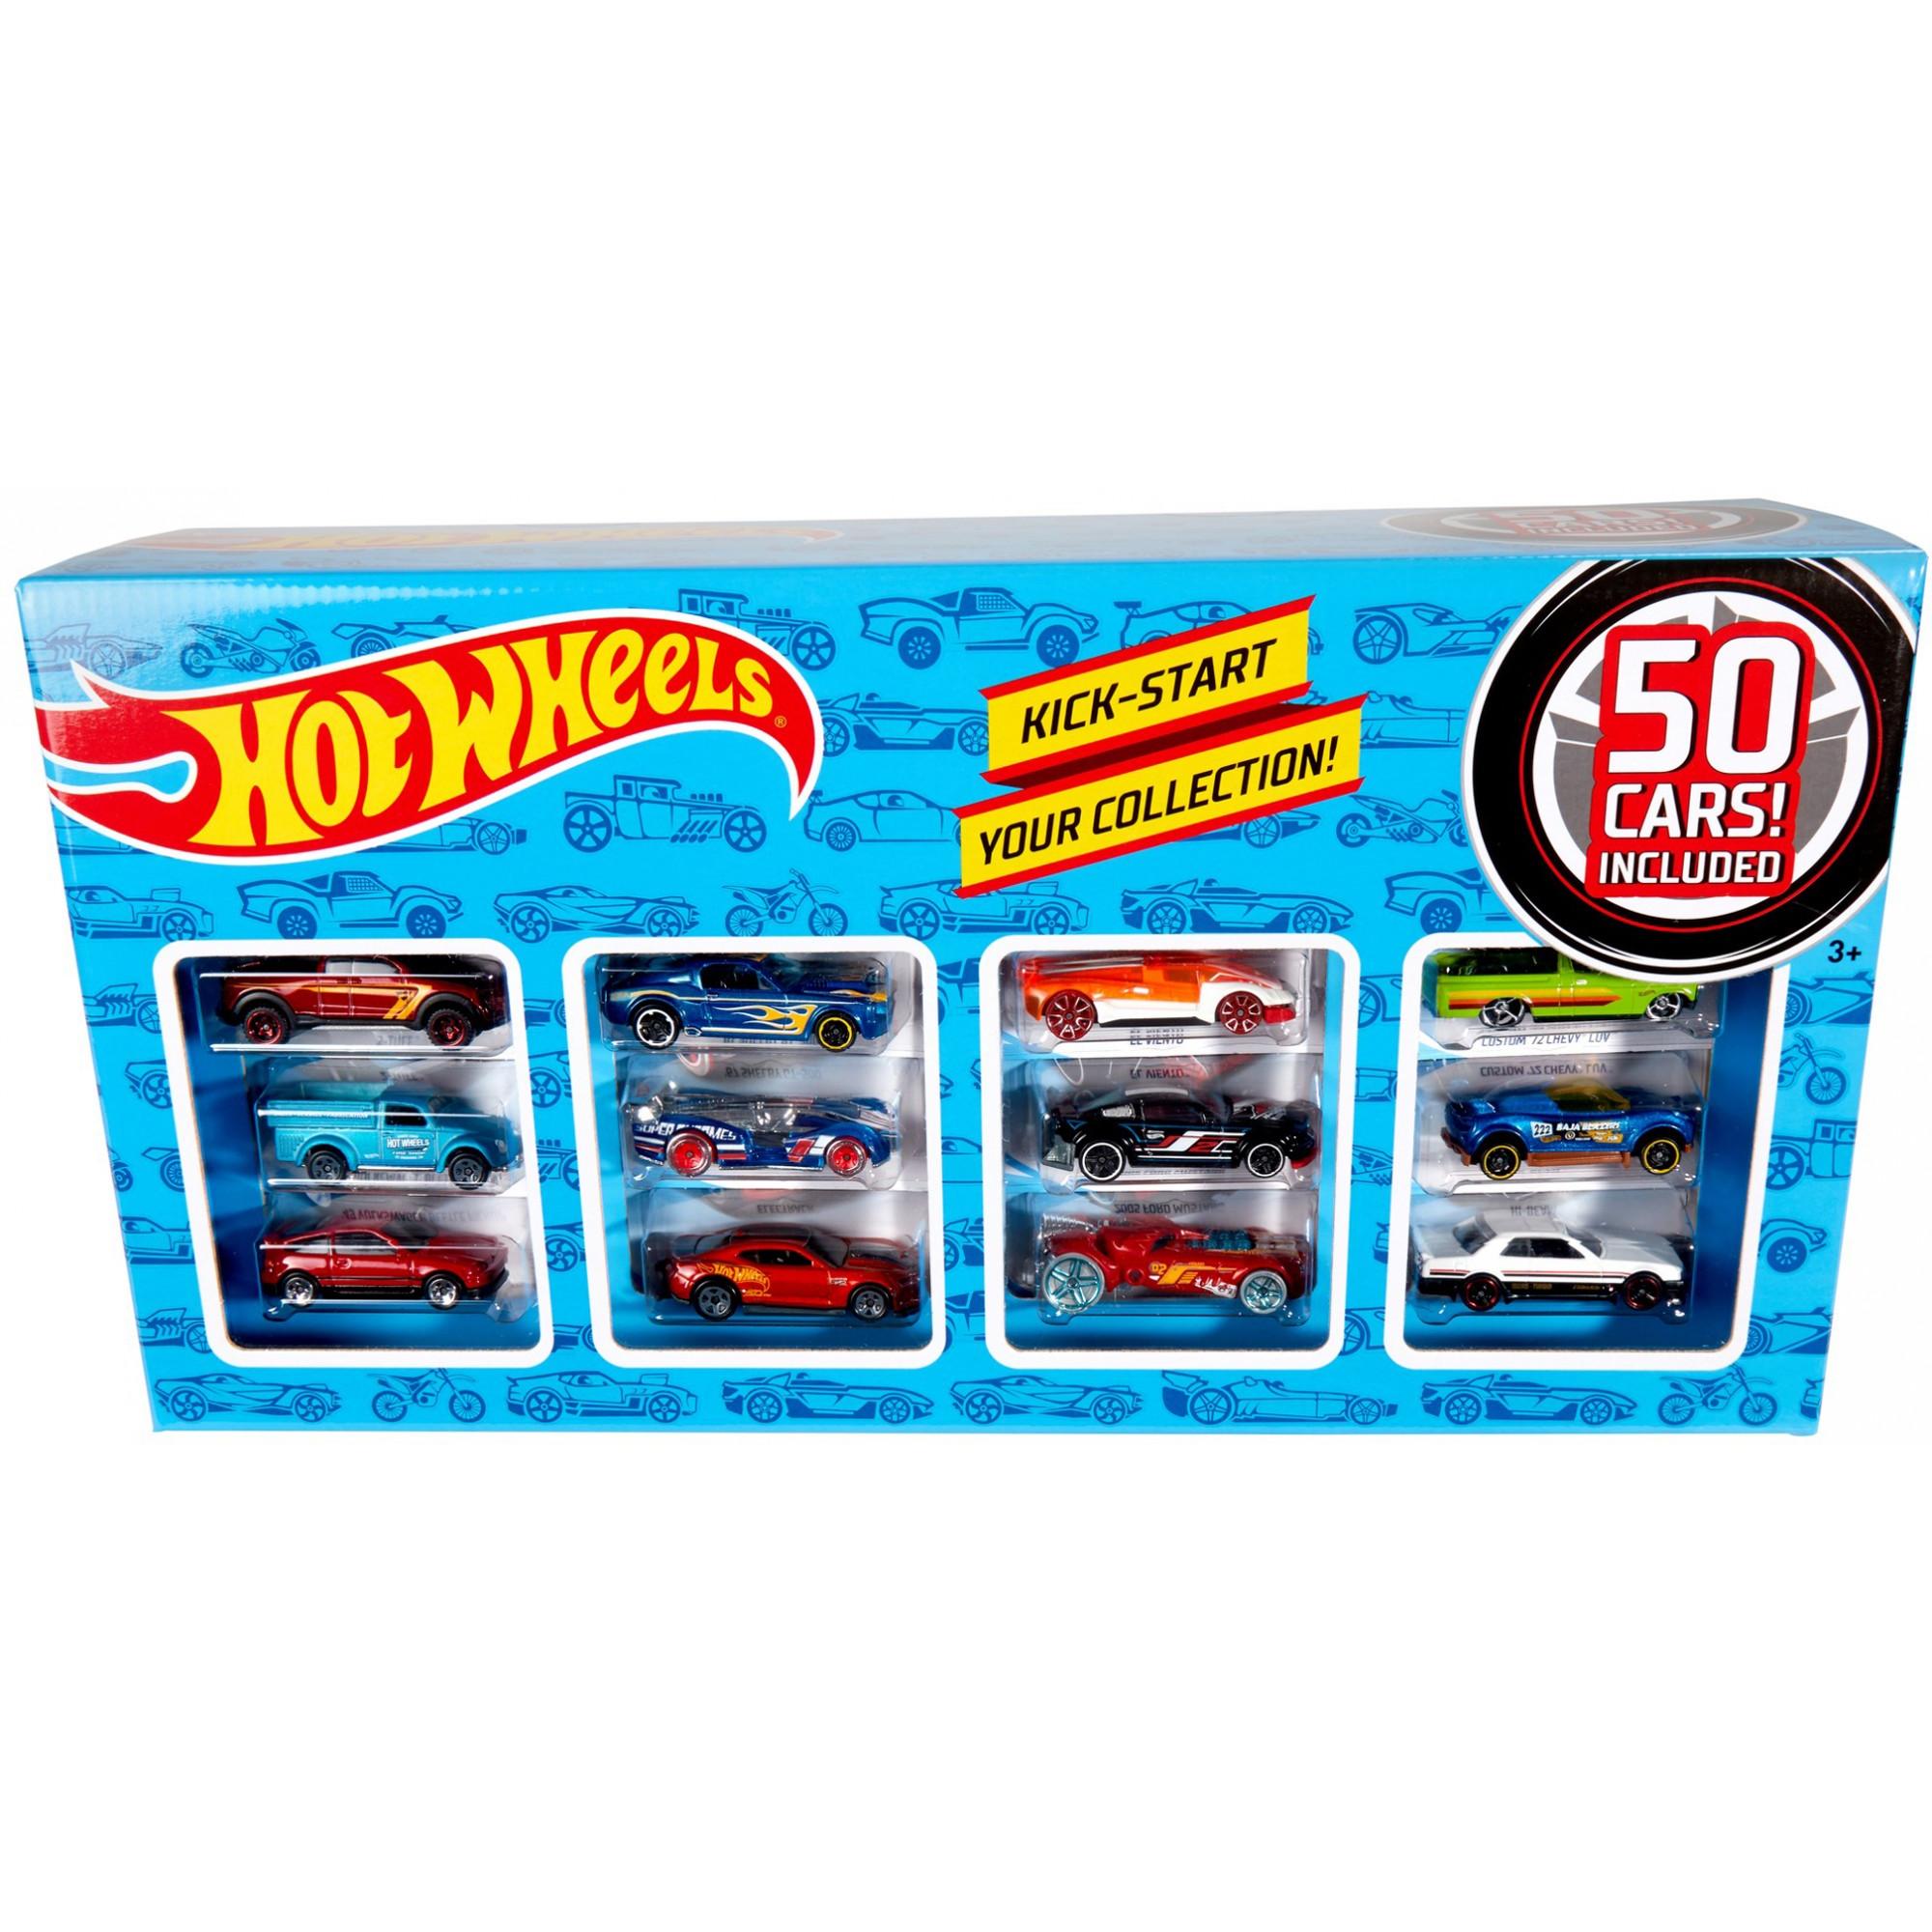 Hot Wheels Classic 50-Car Collection Pack (Styles May vary) - image 1 of 2